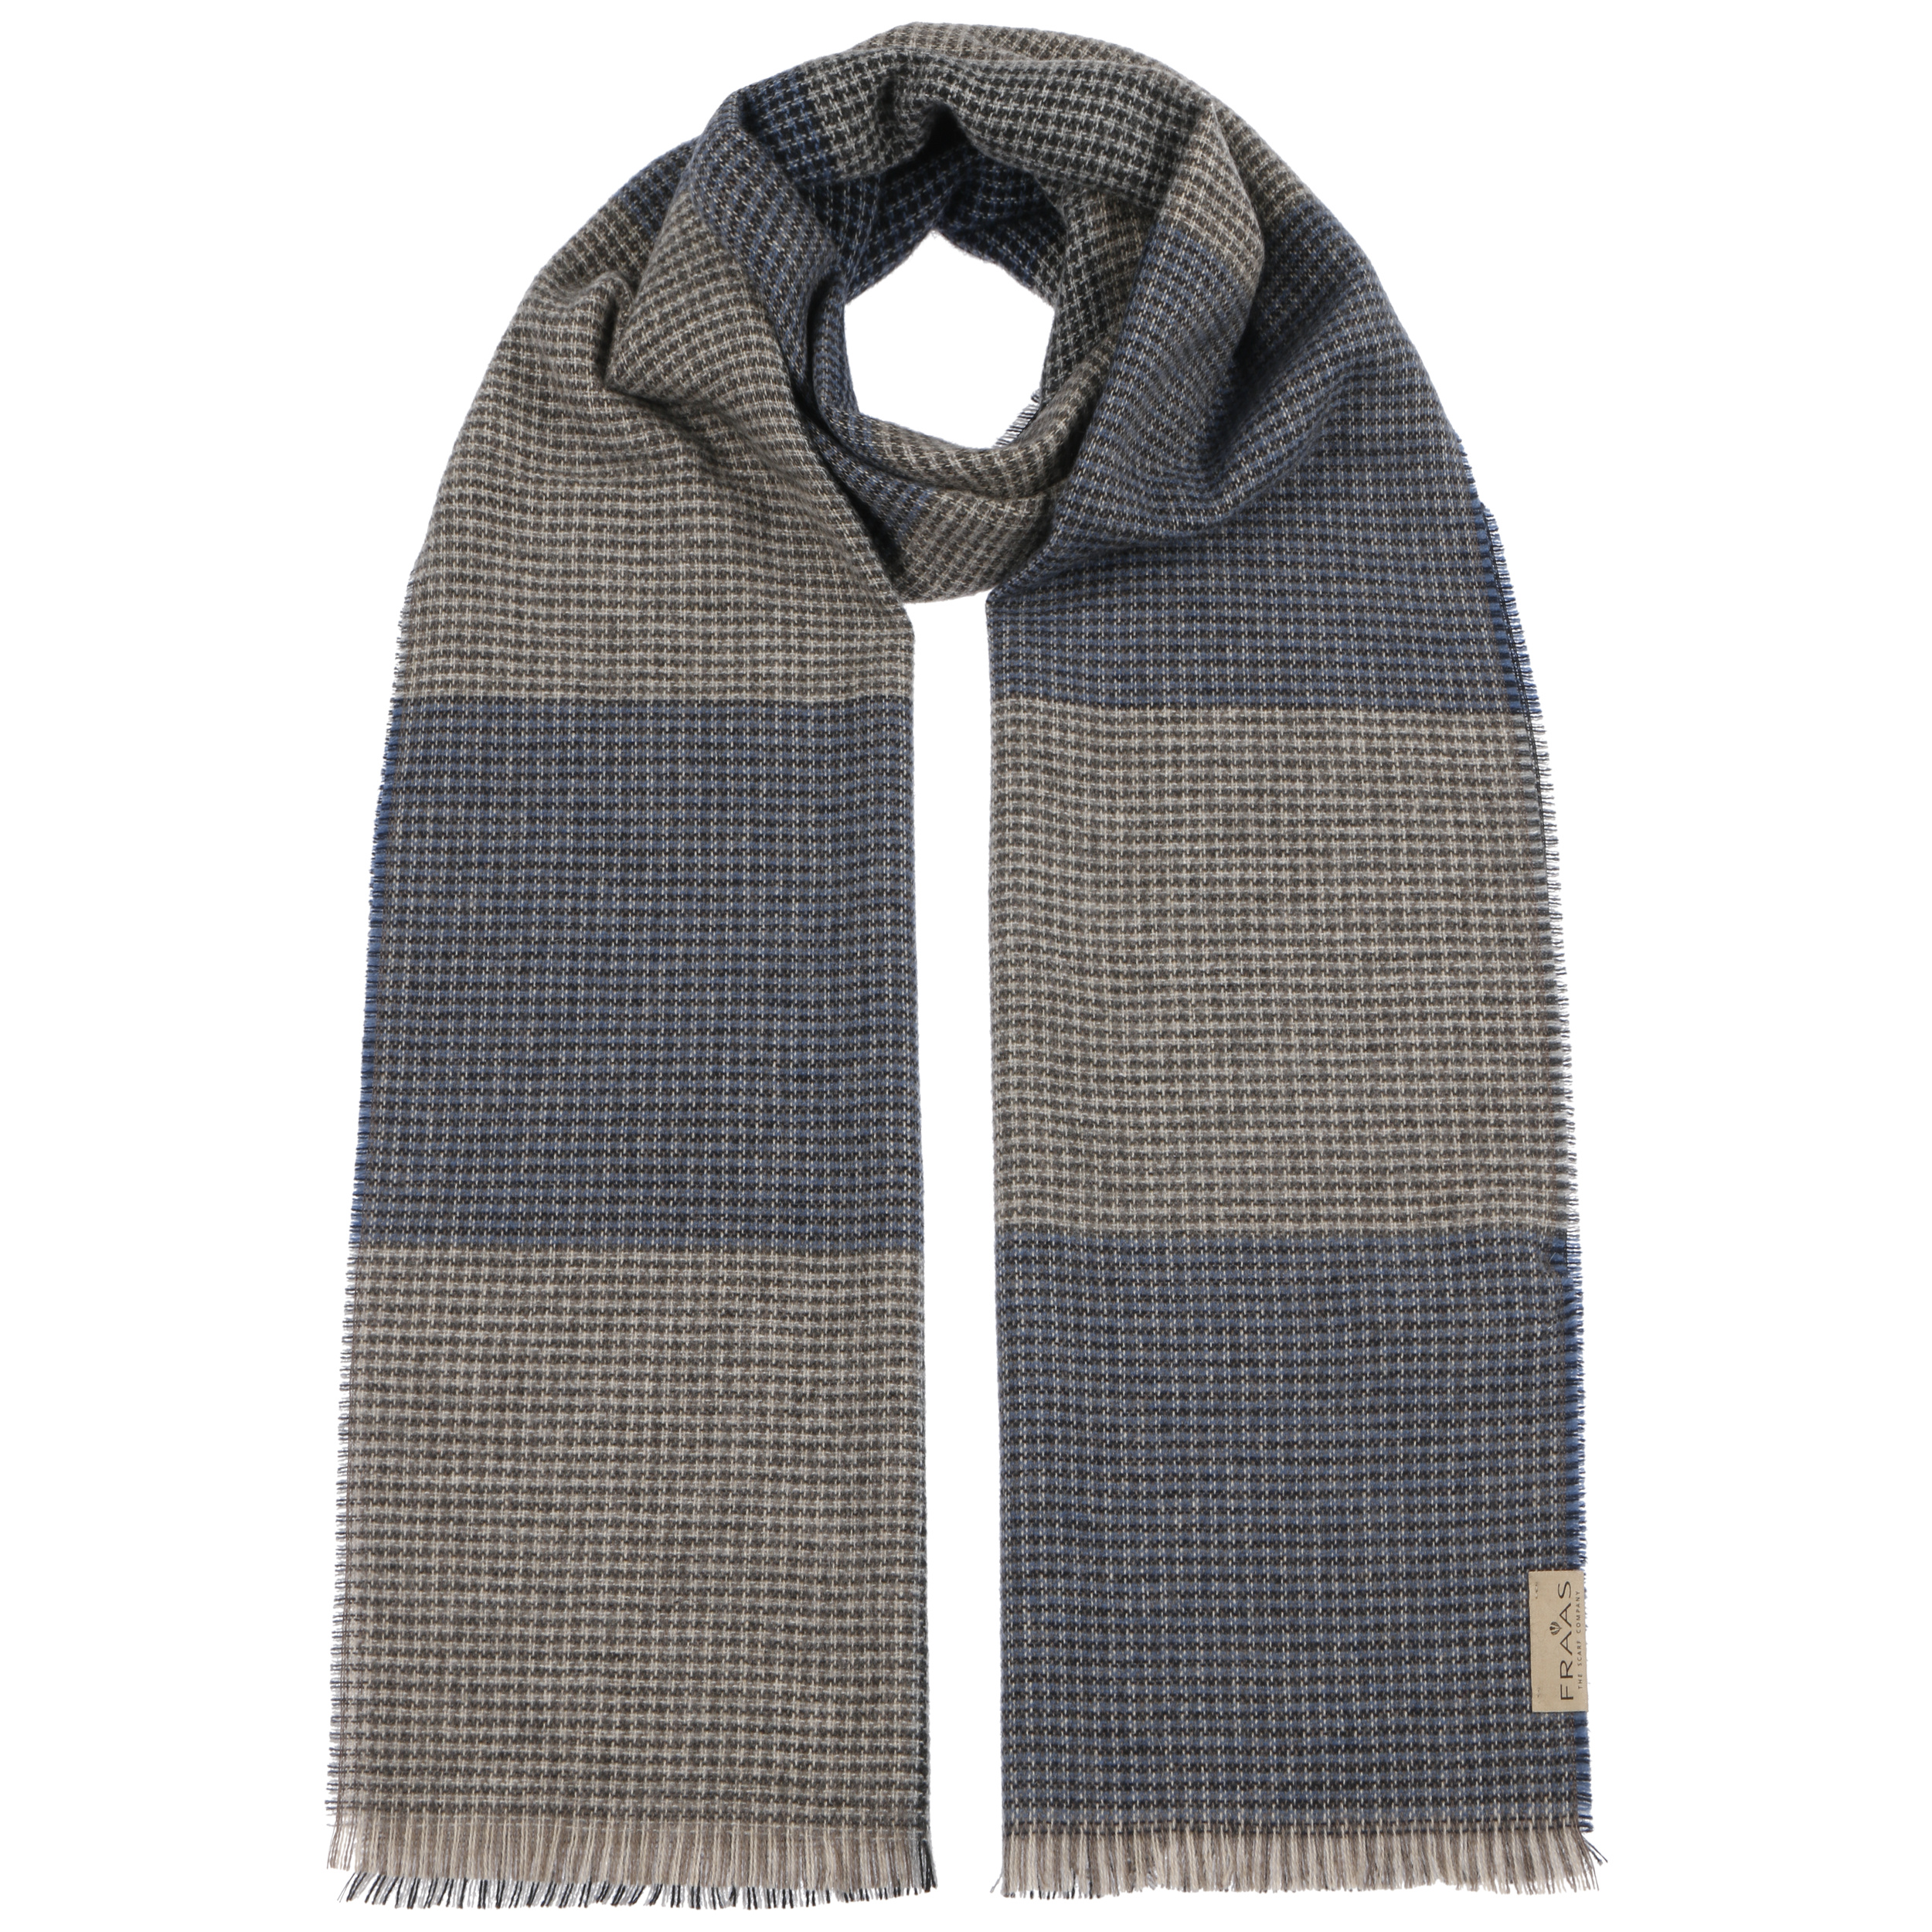 Tricolour Check Cashmere Scarf by Fraas - Blue-Beige - Size: One Size